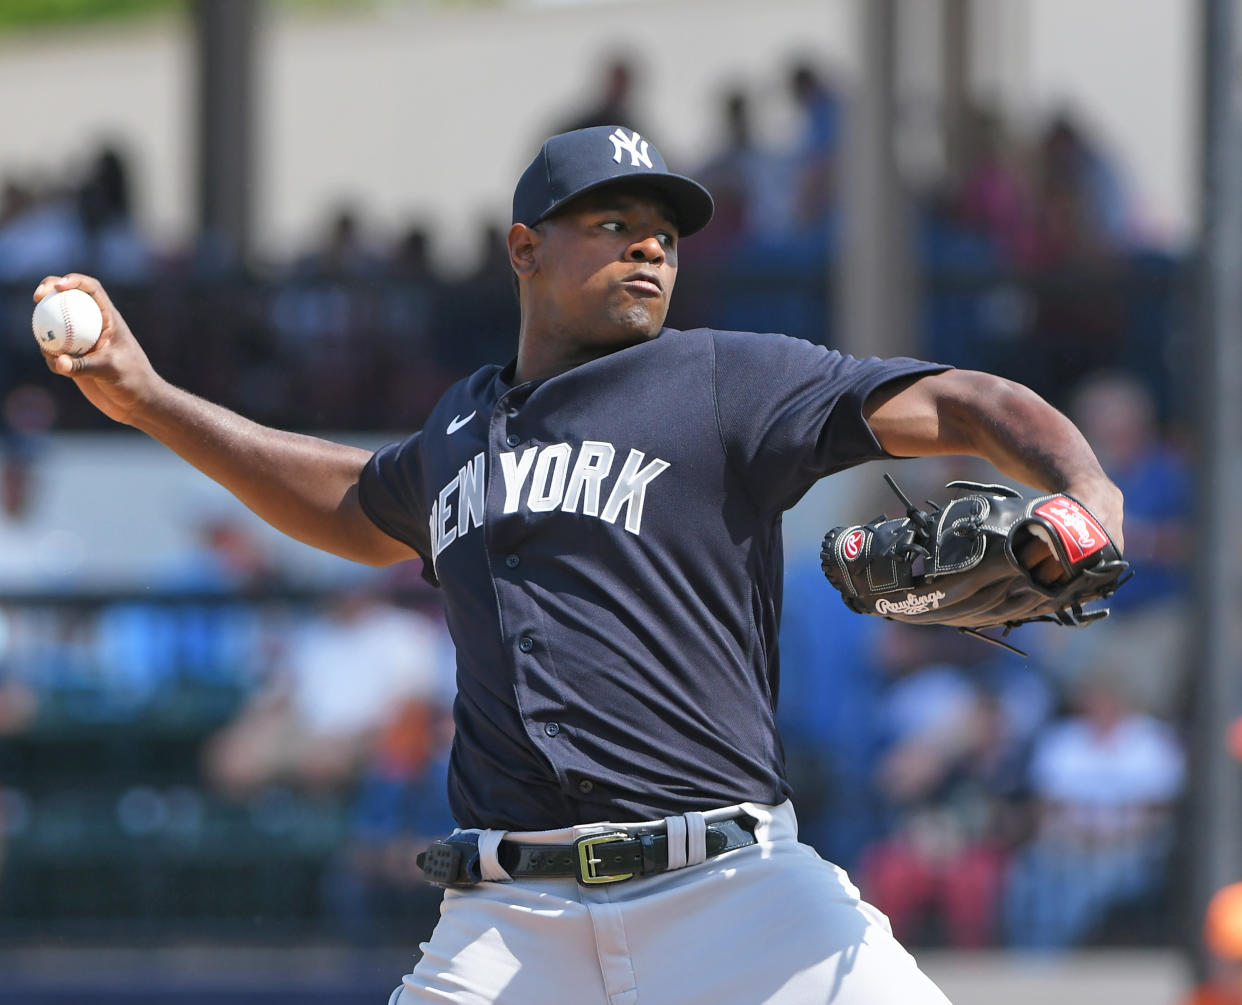 Yankees pitcher Luis Severino is dealing with a right lat strain. (Photo by Mark Cunningham/MLB Photos via Getty Images)